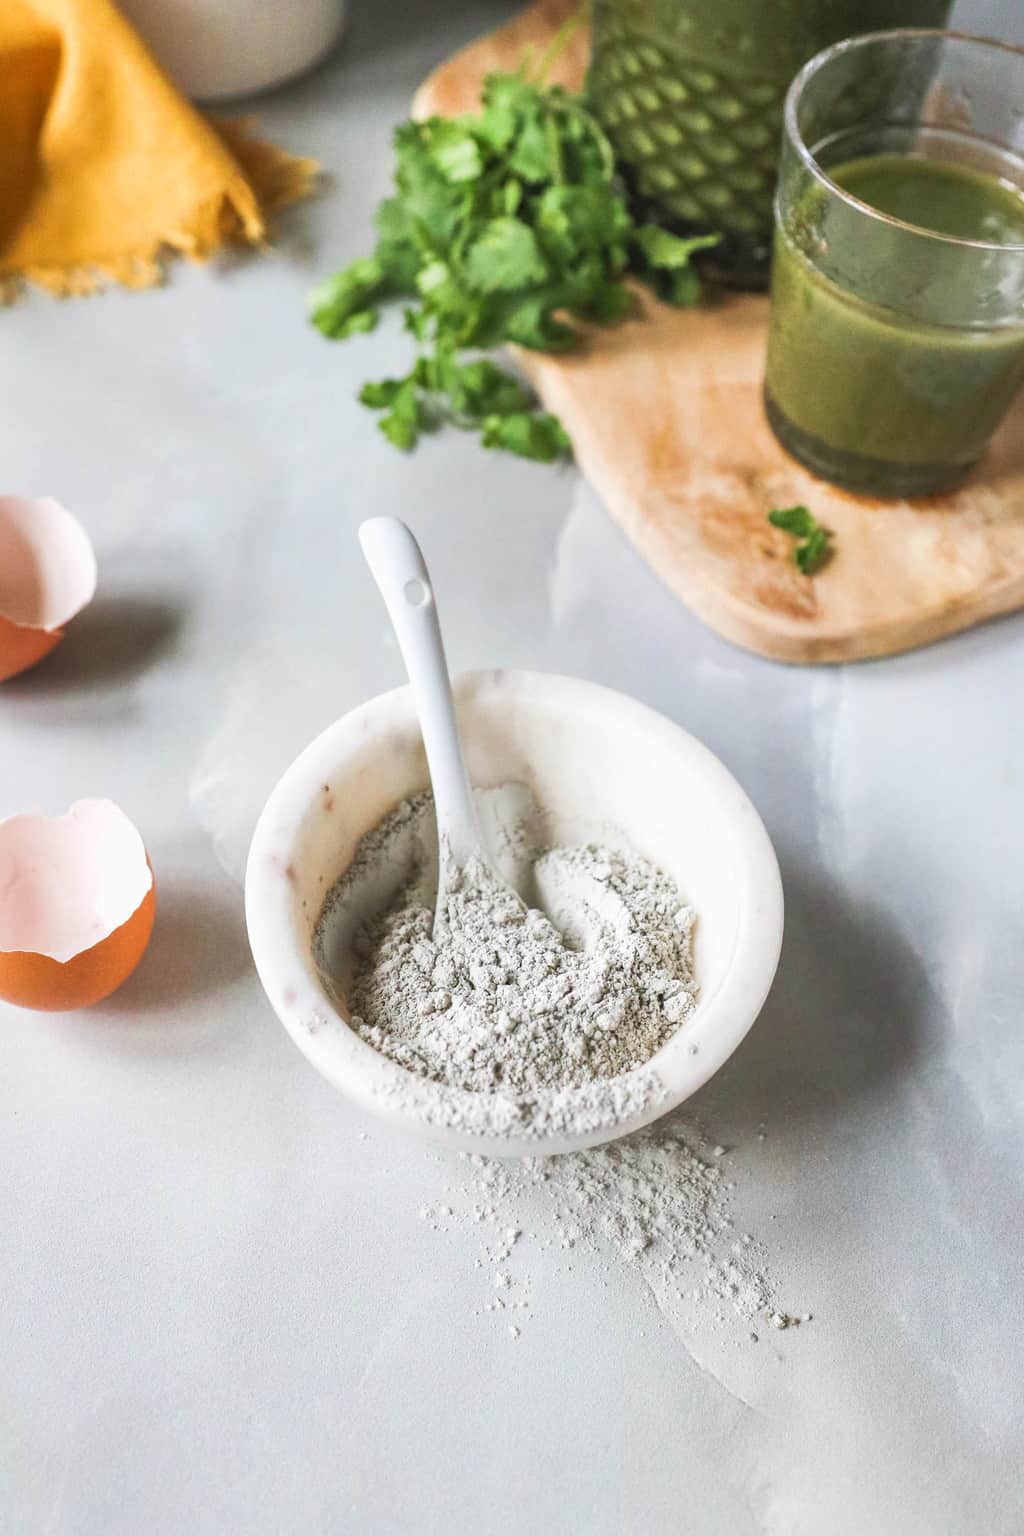 Give Your Smoothies a Boost with This DIY Calcium Powder